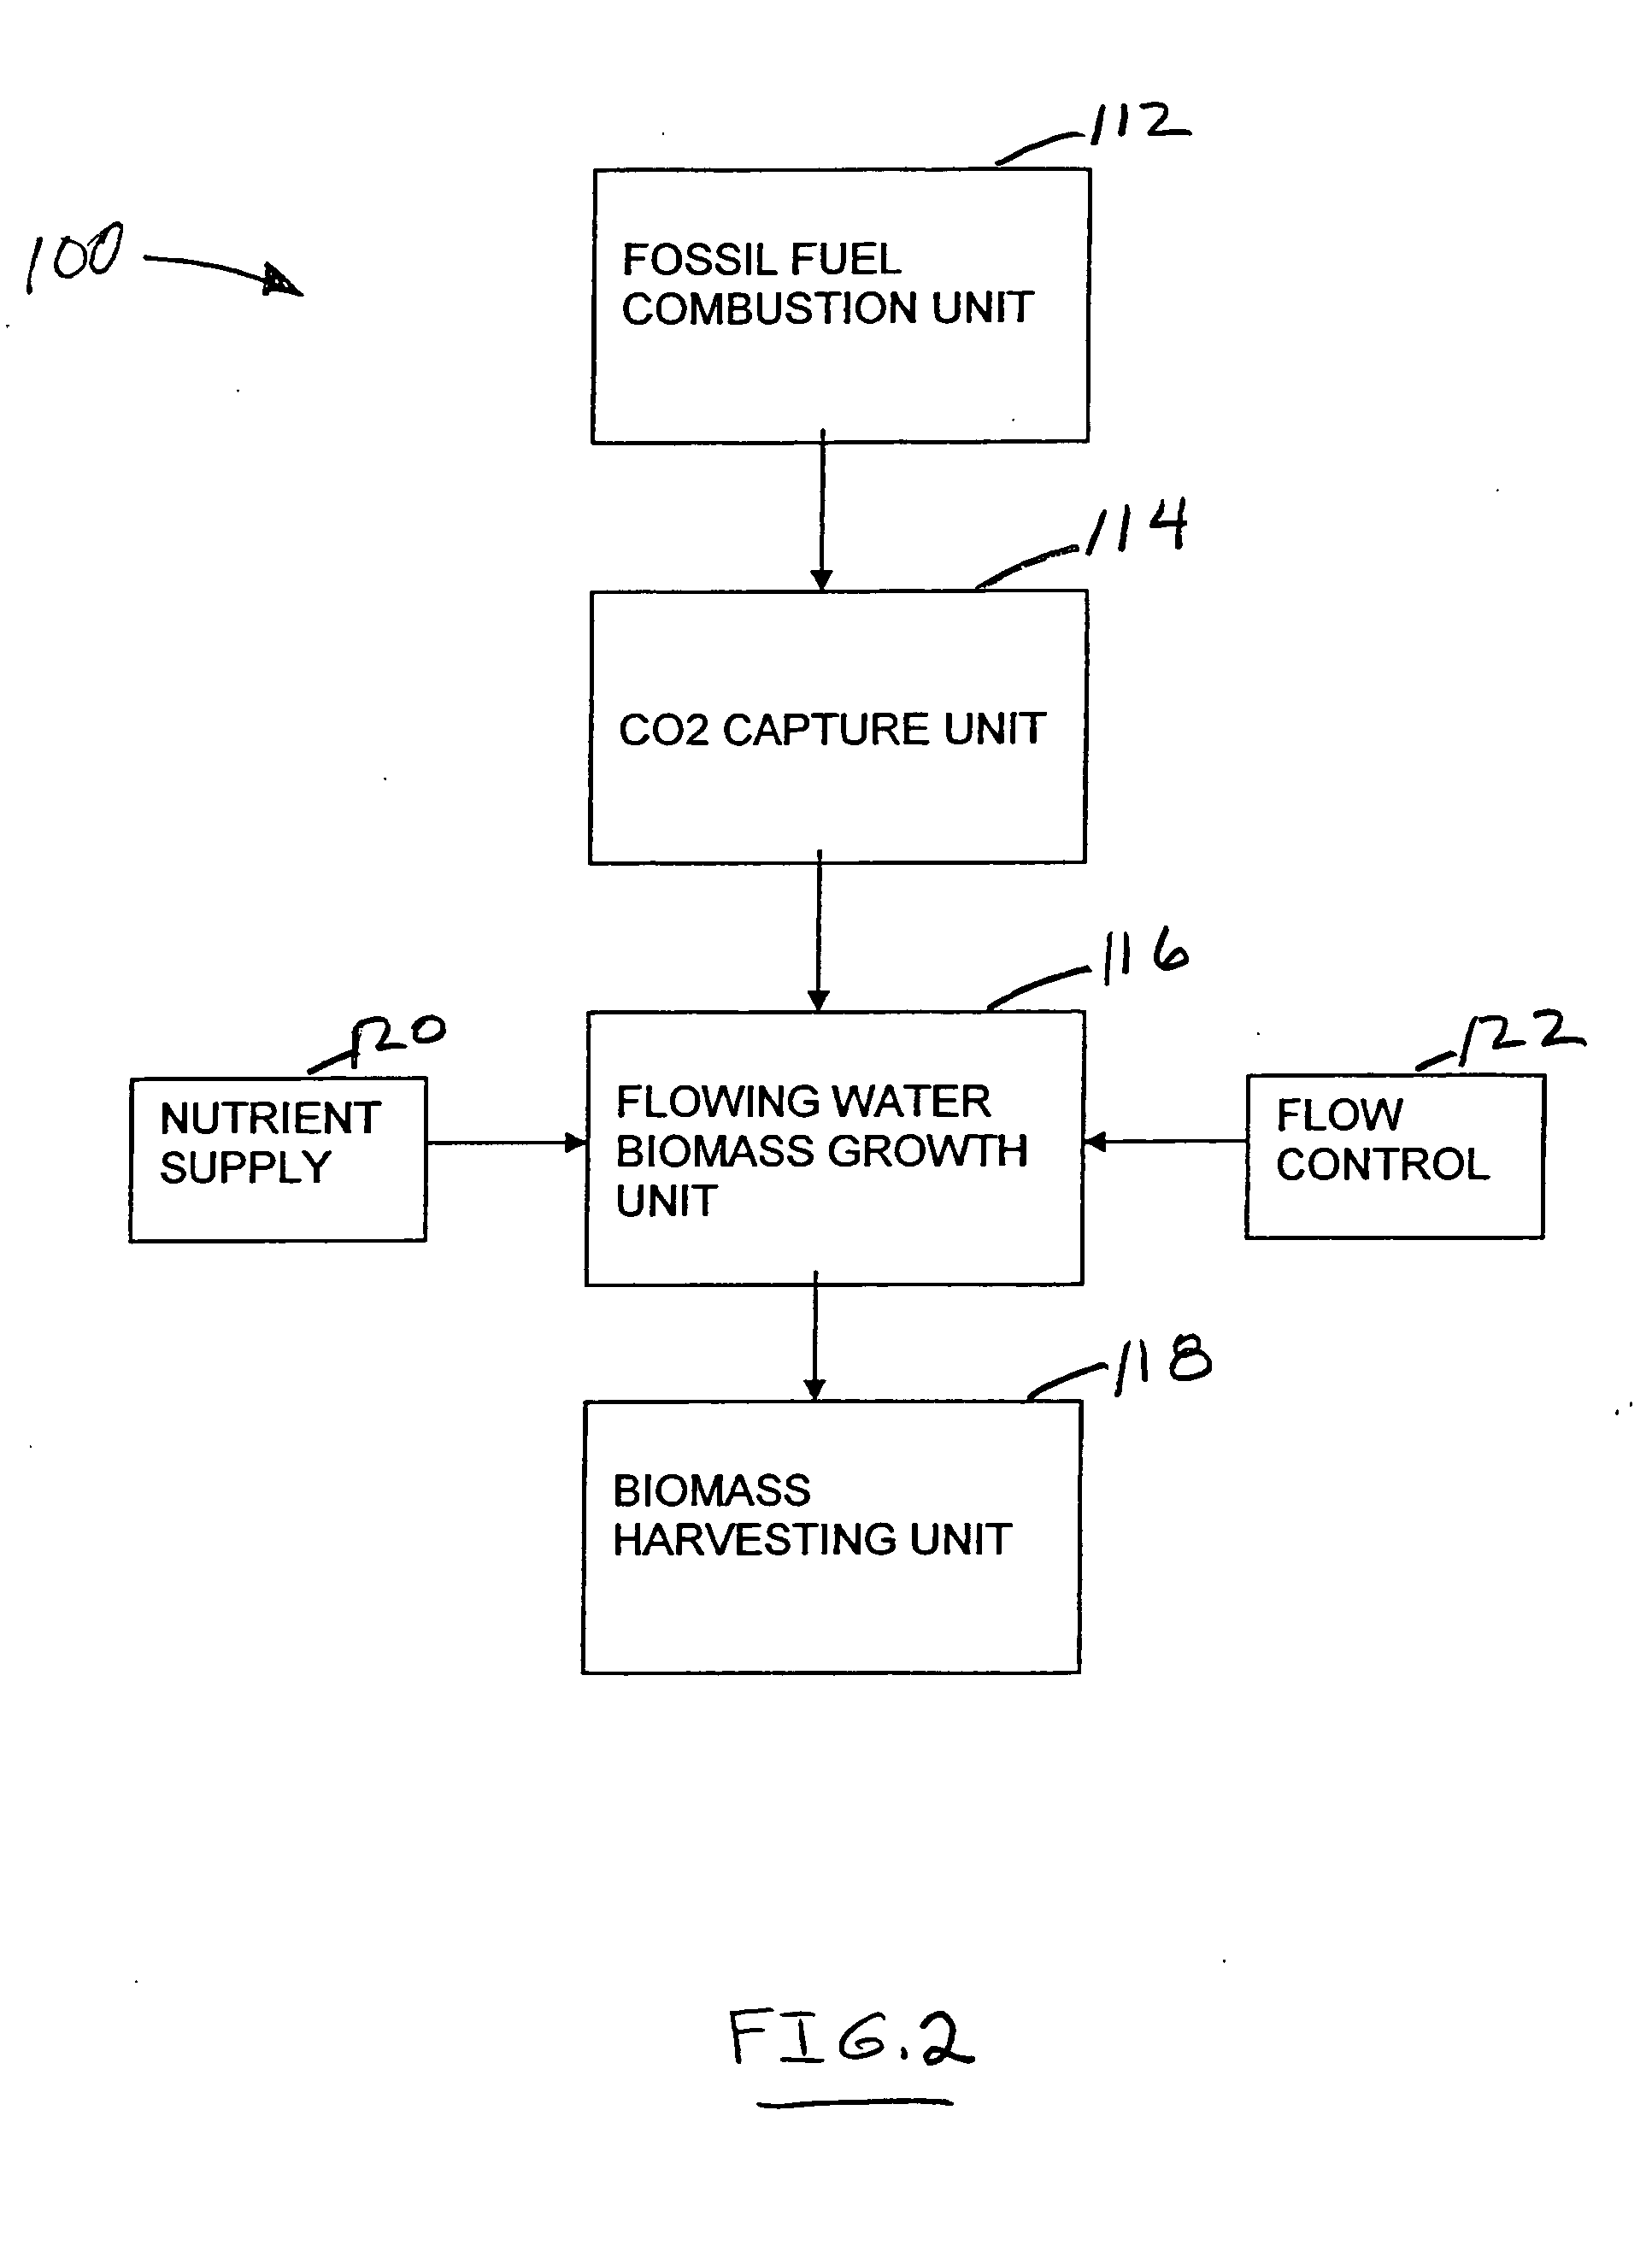 Integrated power plant, sewage treatment, and aquatic biomass fuel production system